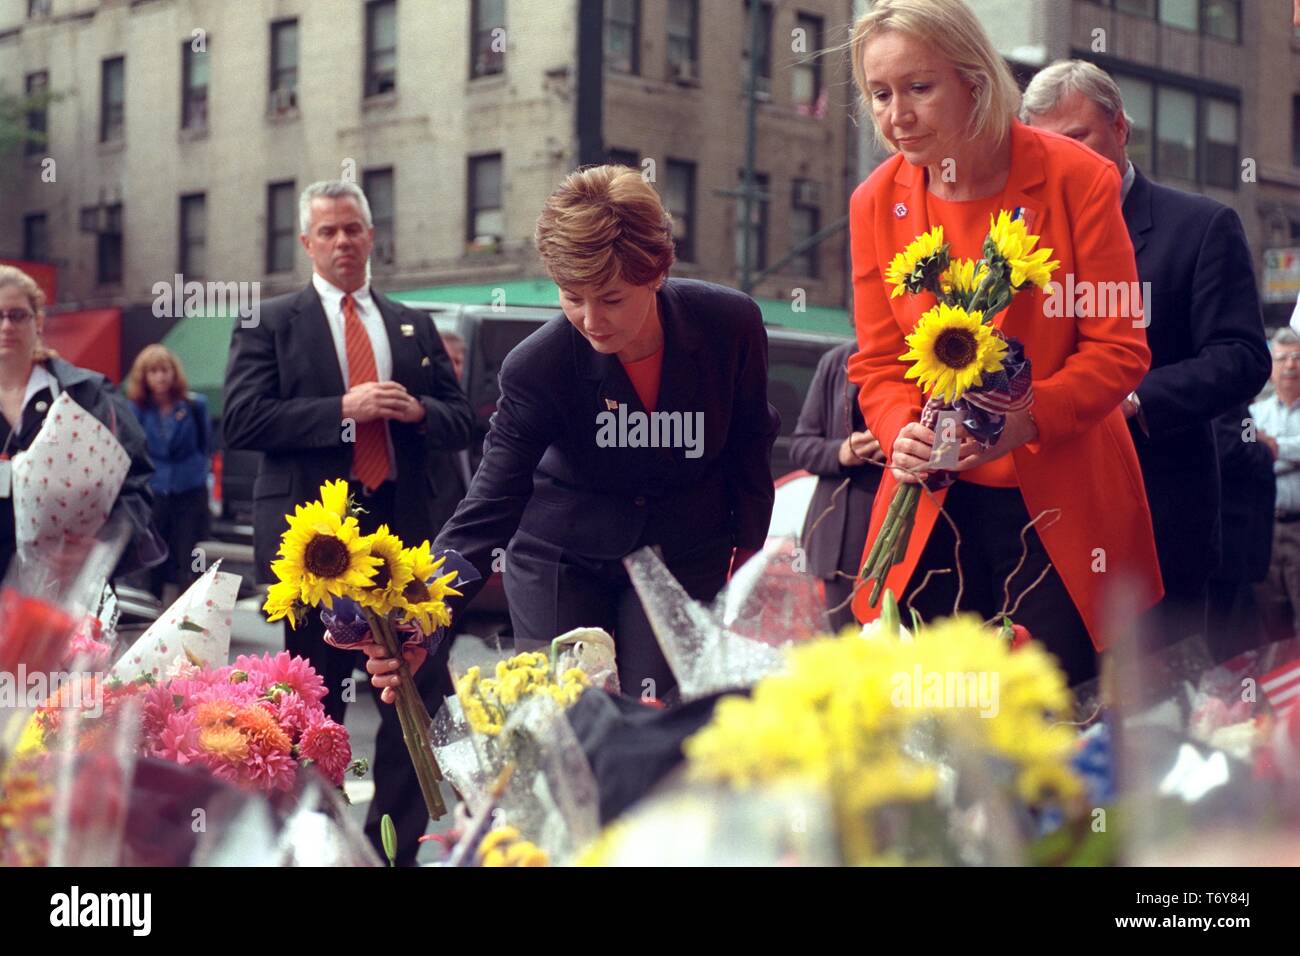 First Lady Laura W Bush and Libby Pataki, wife of New York Governor George Pataki, place sunflowers at a memorial at Battalion 9 Firehouse in New York City, honoring the firefighters who died at the World Trade Center, 2001. Courtesy National Archives. () Stock Photo